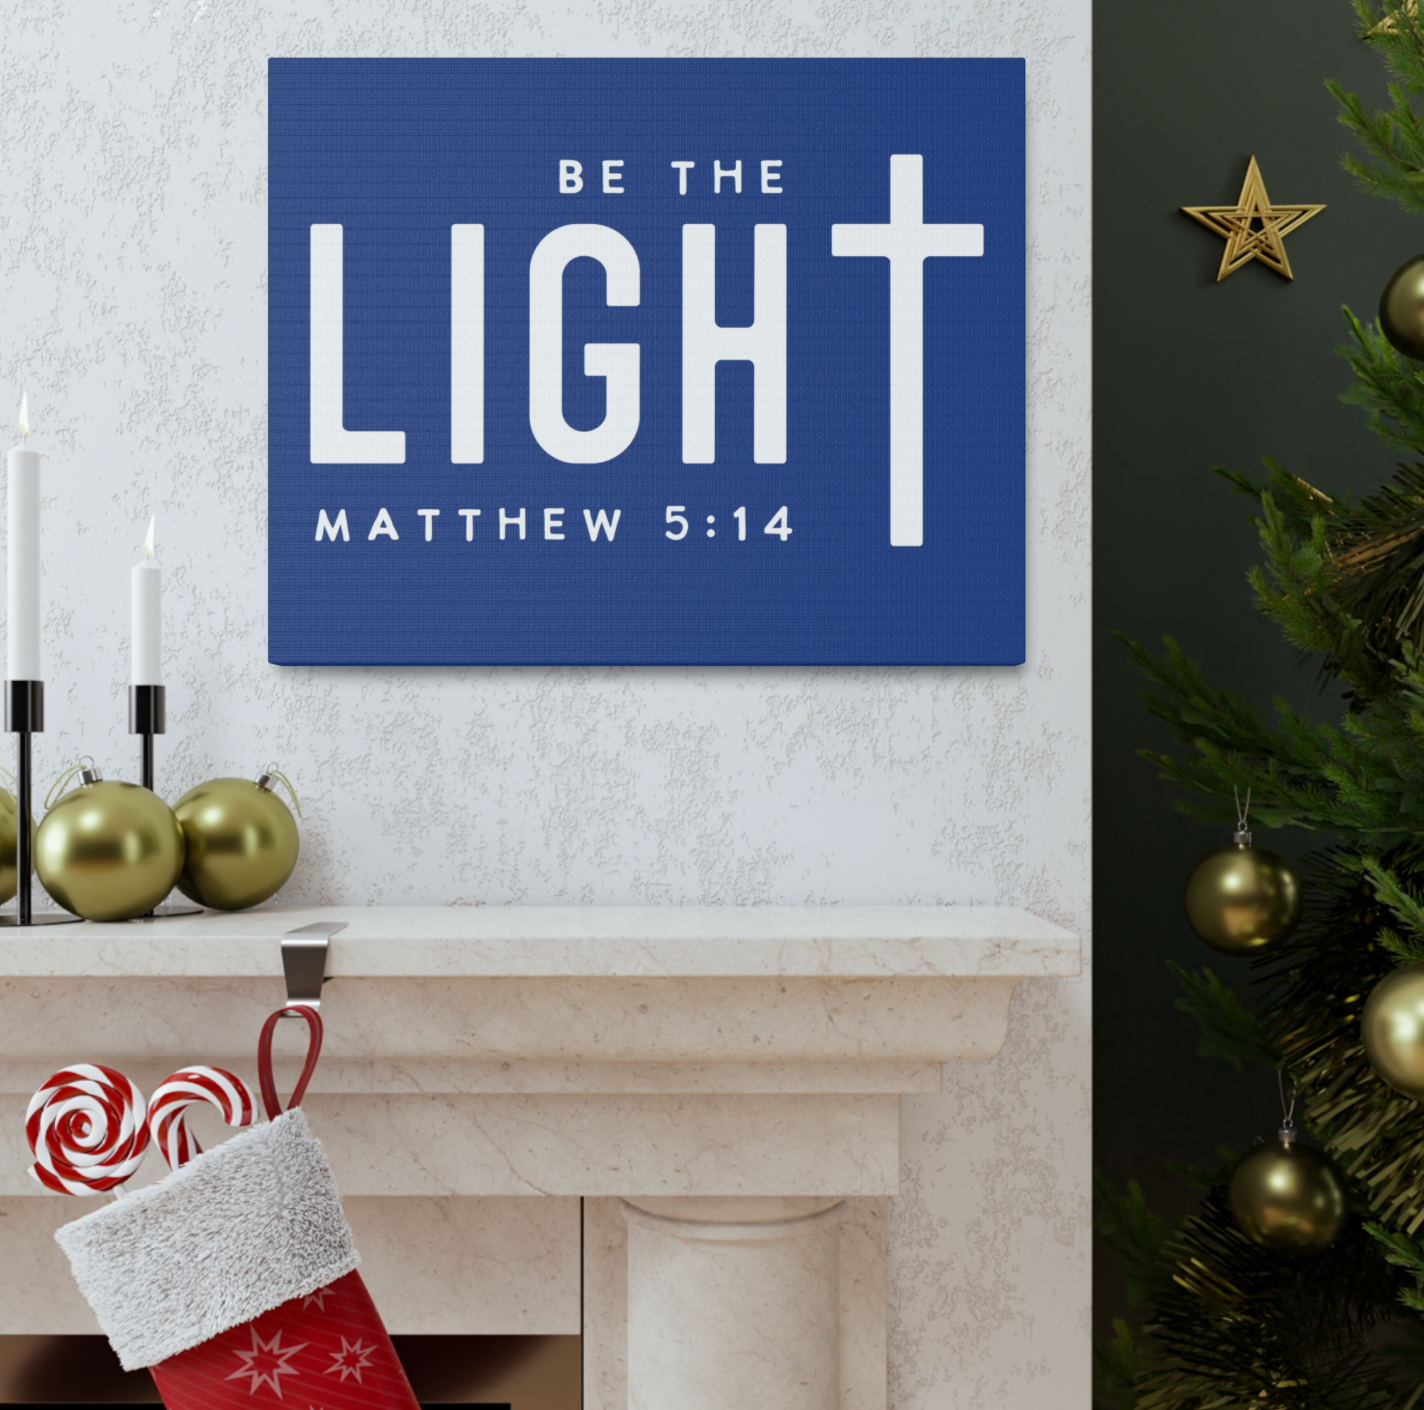 Be The Light Canvas Gallery Wrap: Free Shipping